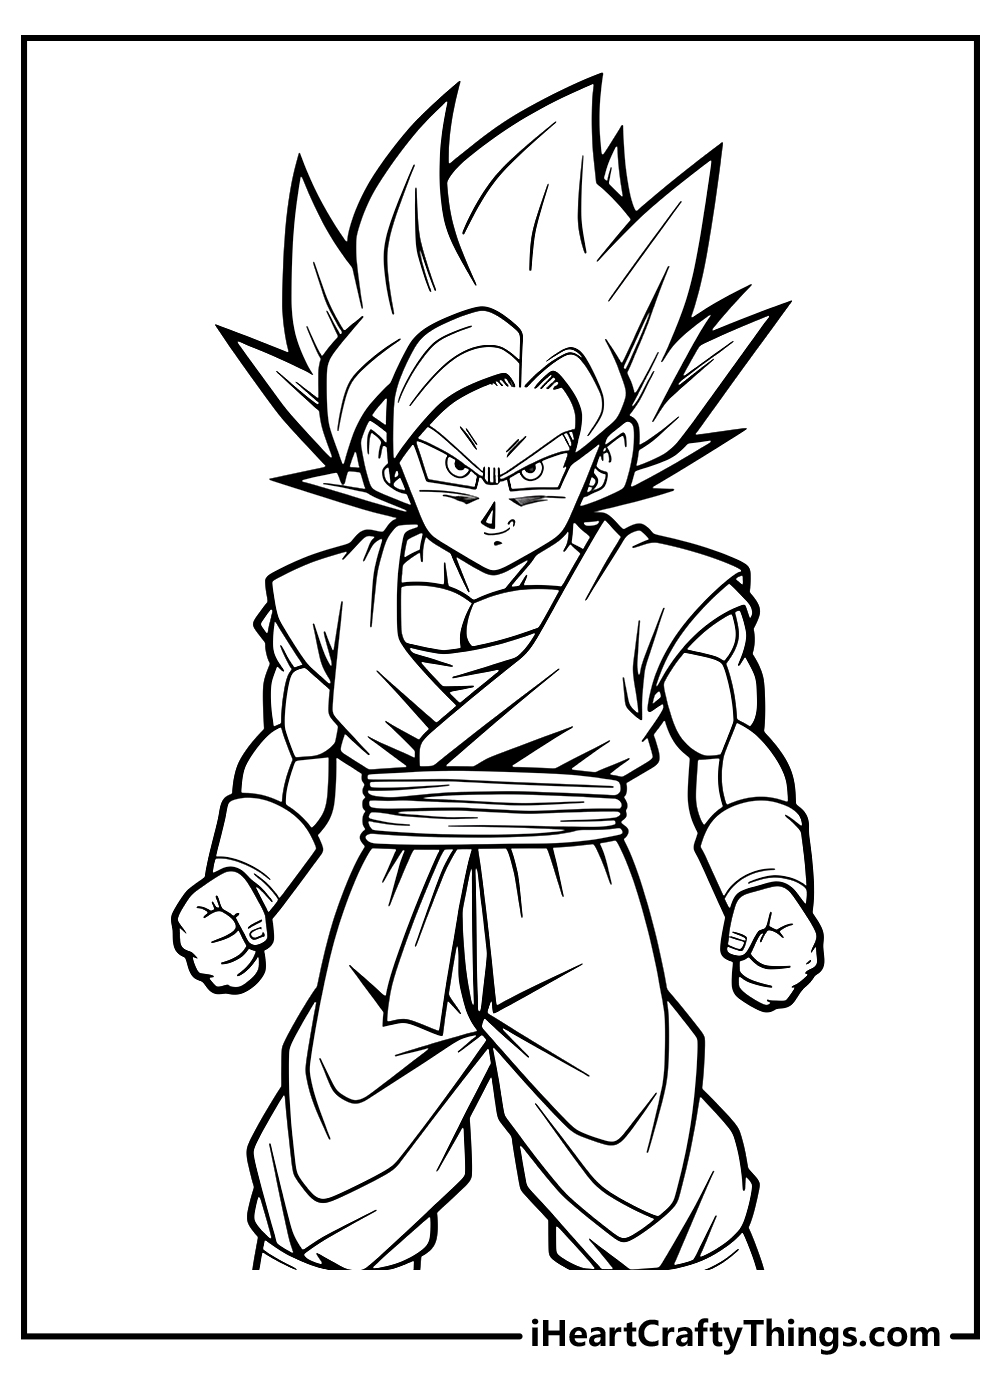 100 Exciting Dragon Ball Z Coloring Ideas 51